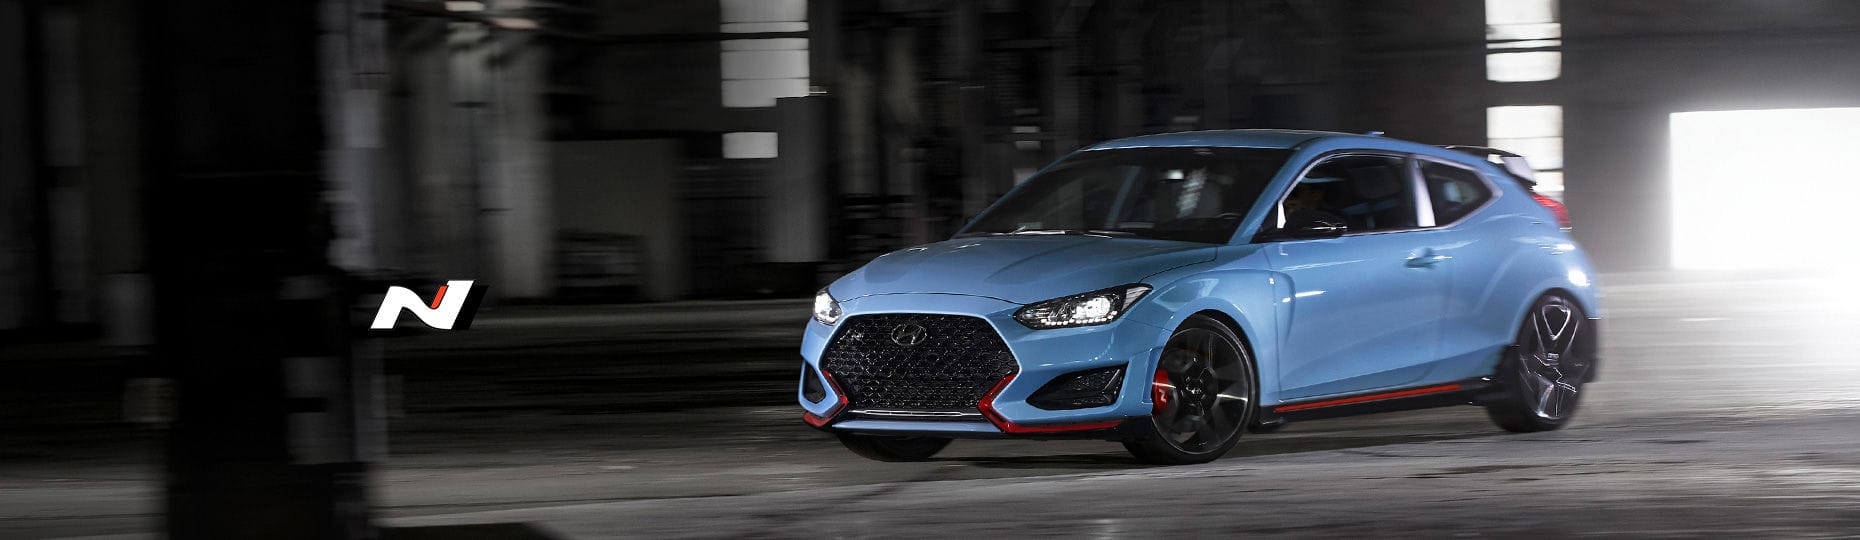 The Hyundai Veloster: A Quirky Corner Carver With a Cult Following